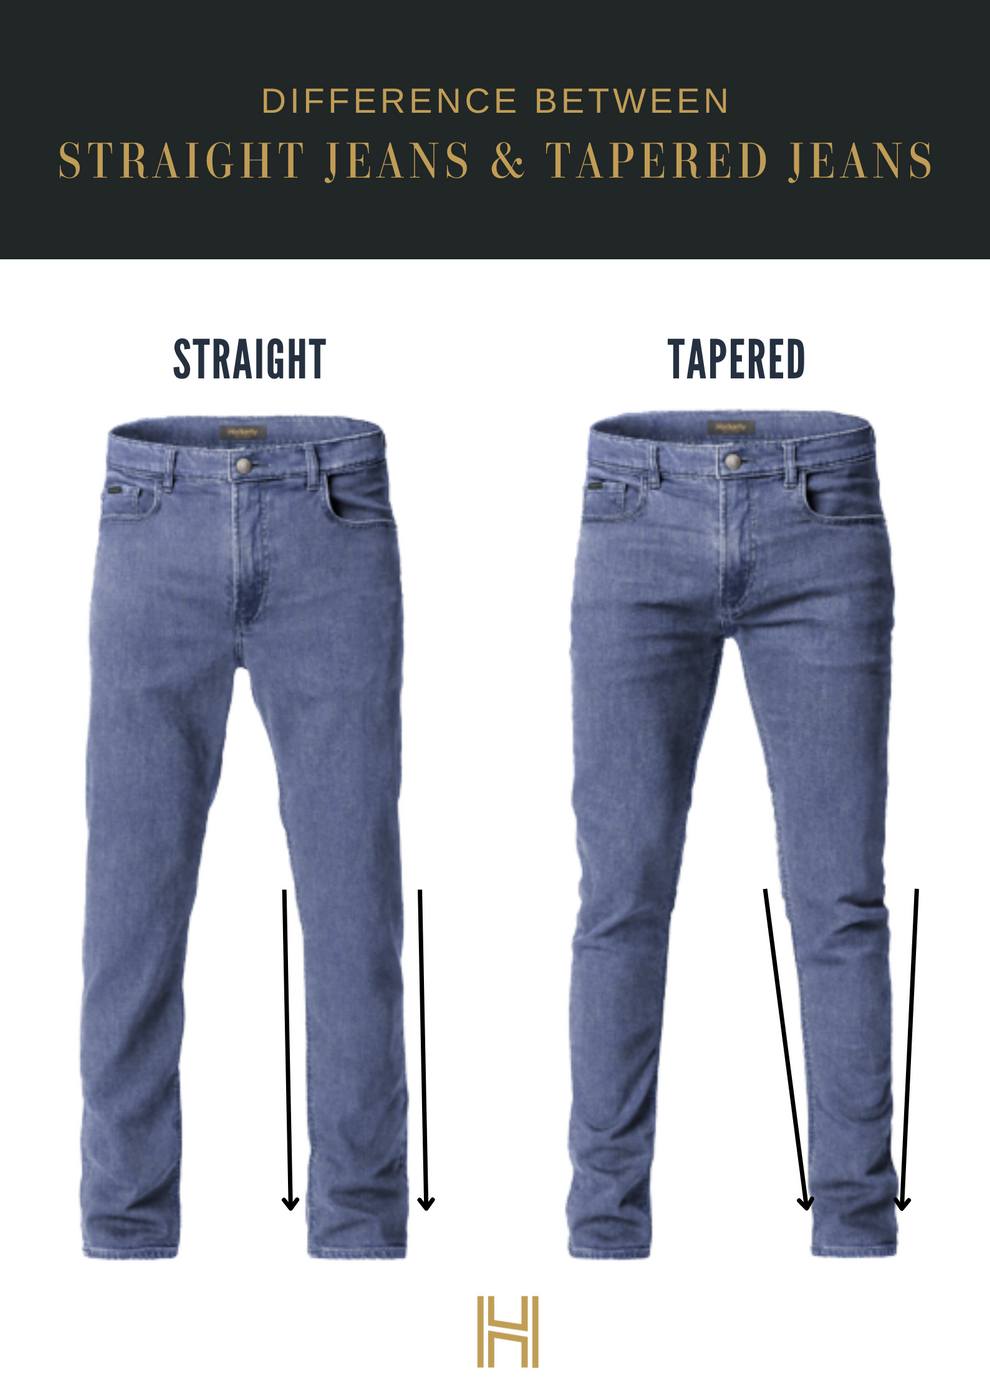 velordnet Ni Frø What are Tapered Jeans? - Hockerty